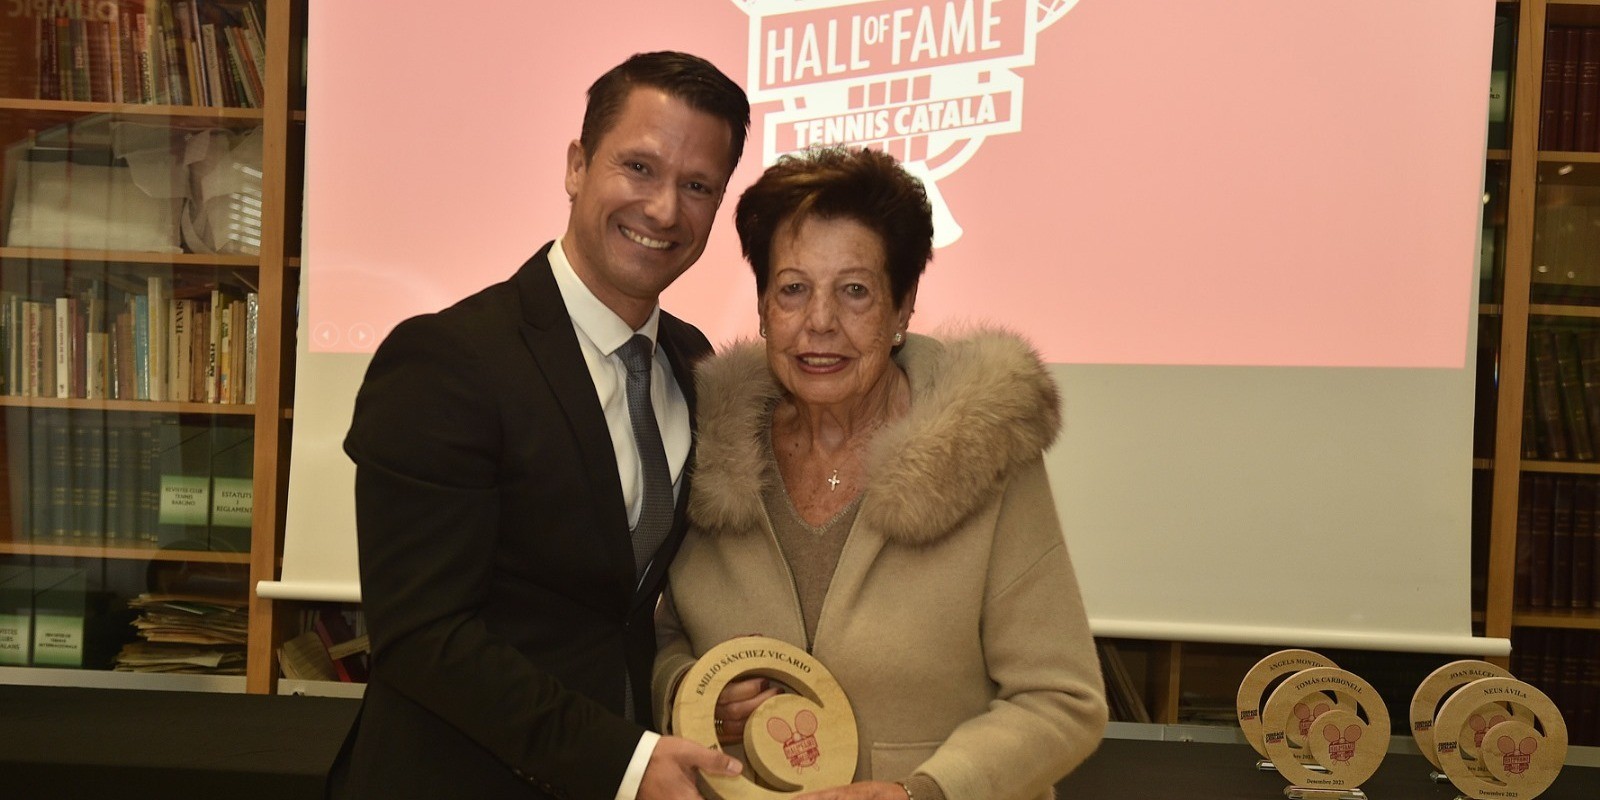 Emilio Sánchez Vicario, who is the CEO and founder of Emilio Sánchez Academy, has been inducted into the Catalan Tennis Hall of Fame.